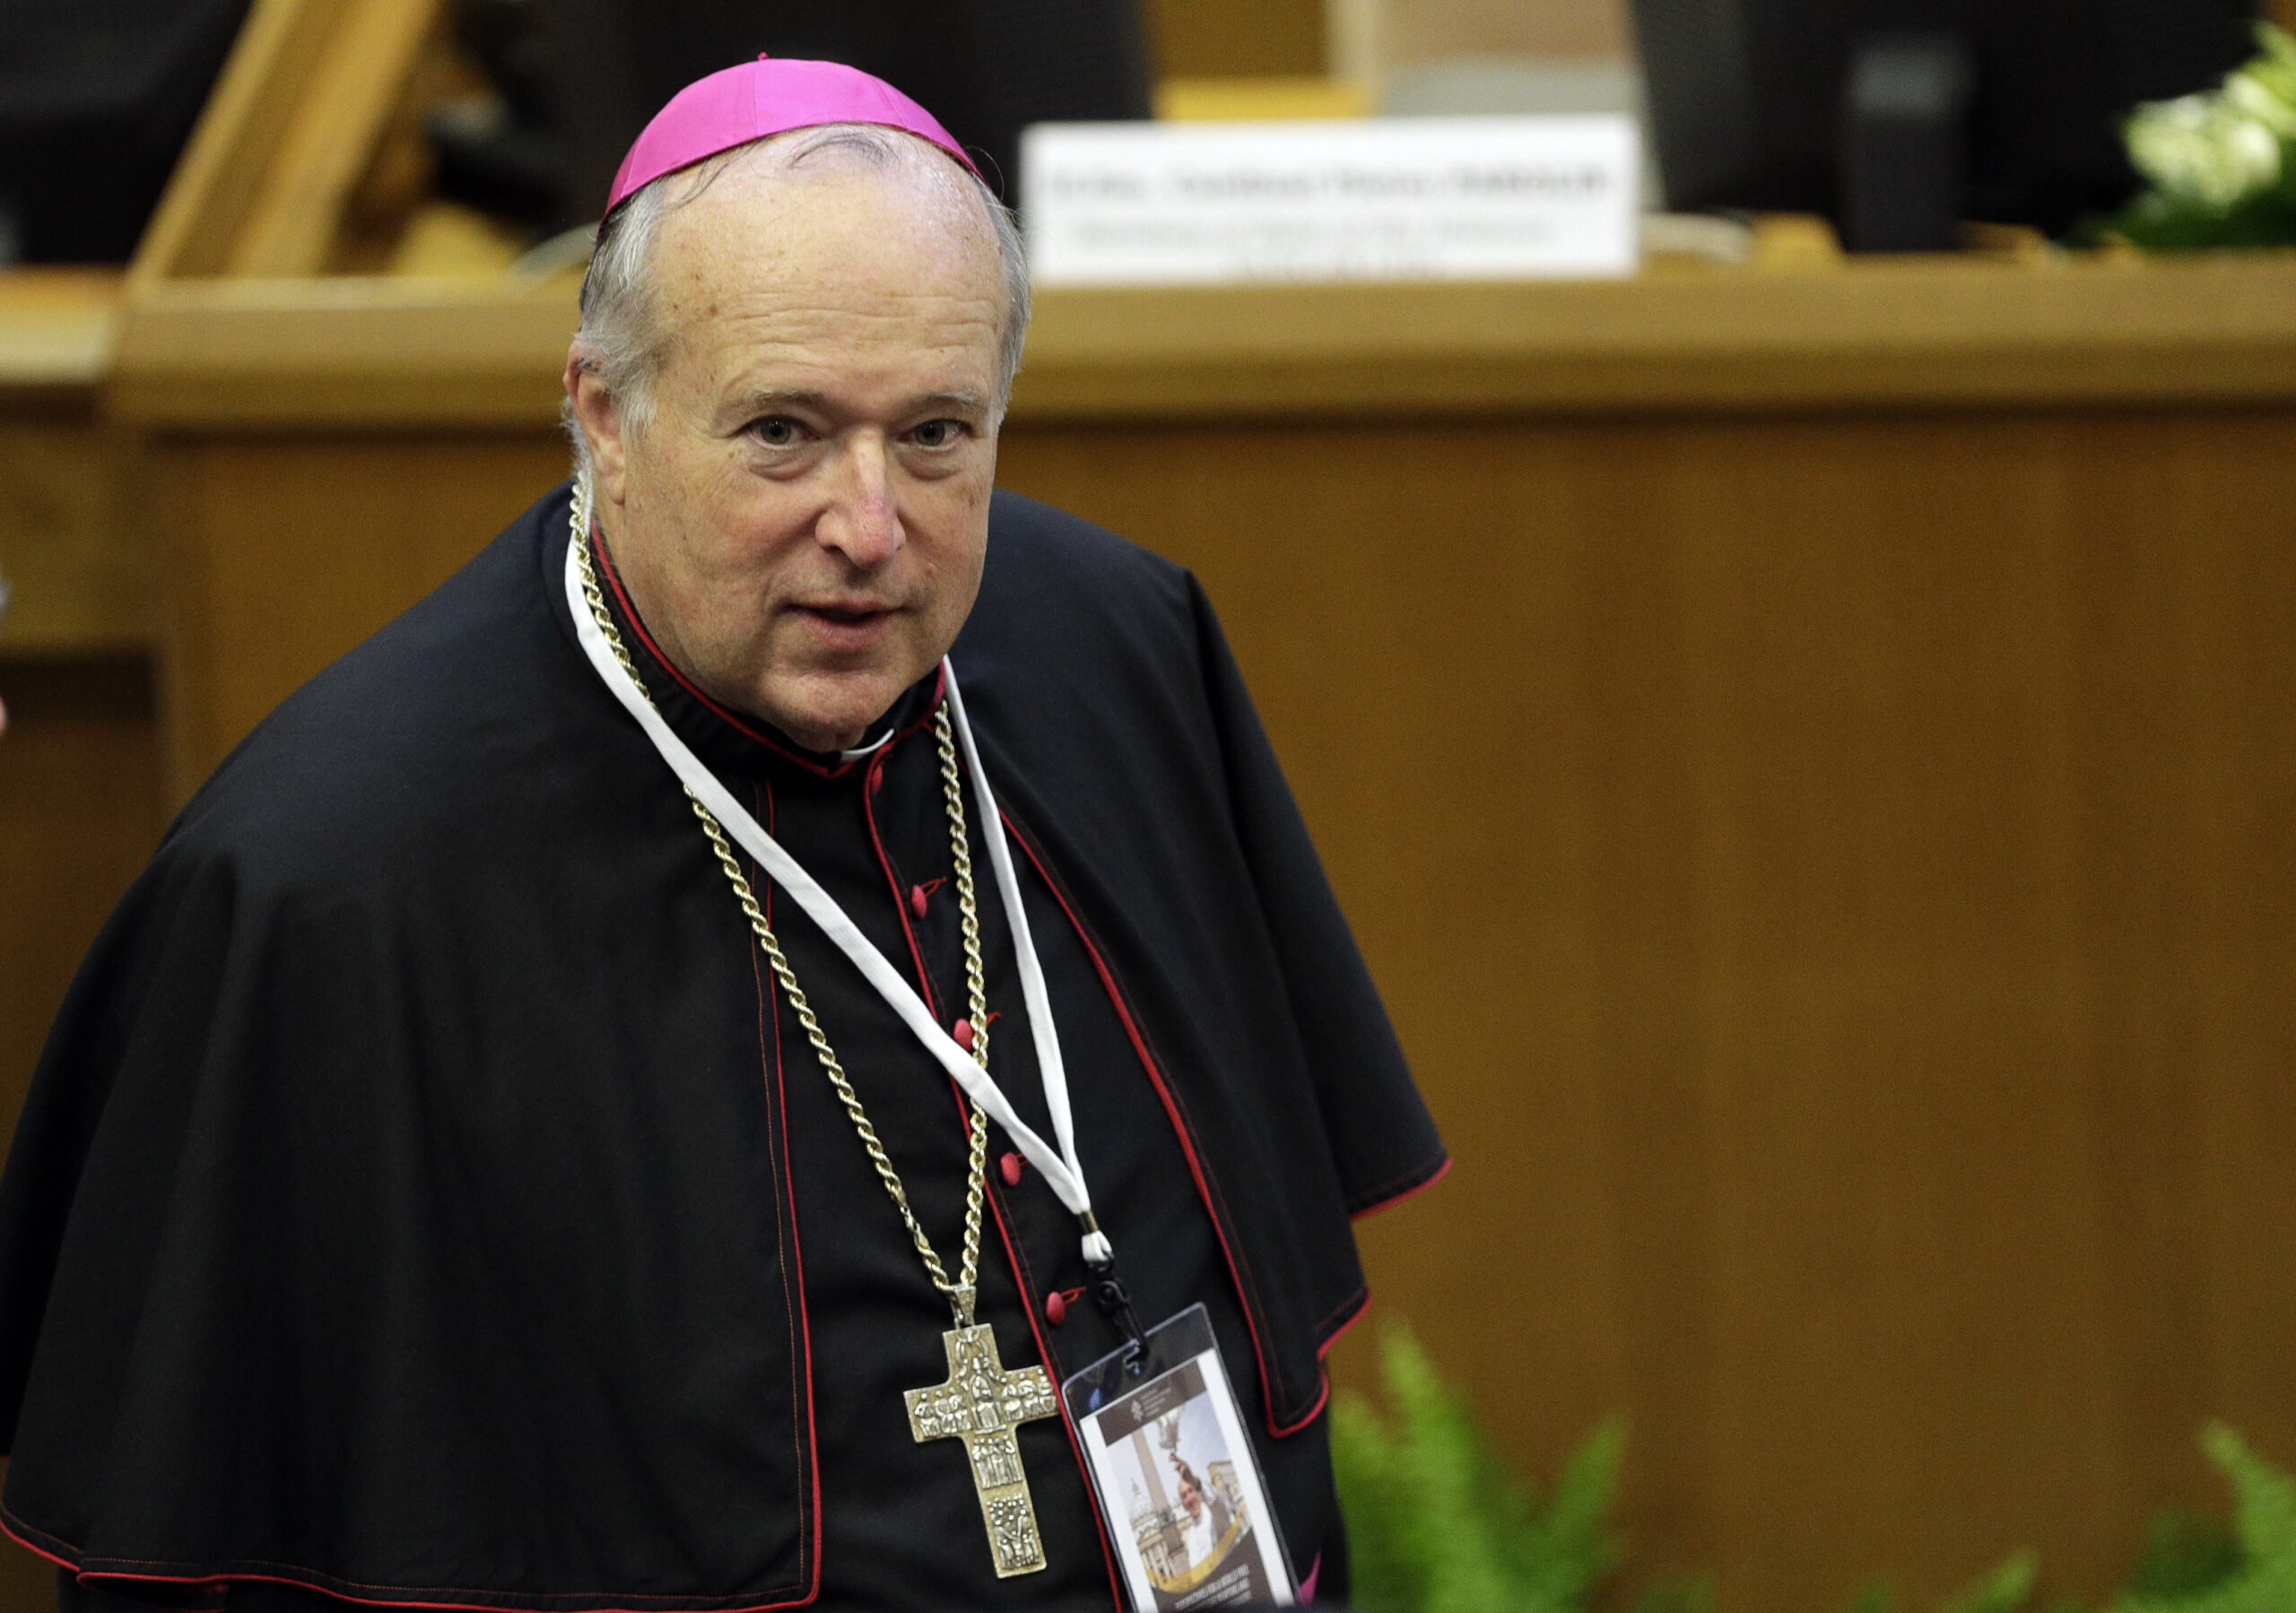 Robert W. McElroy, bishop of the Diocese of San Diego, arrives to attend a conference on nuclear disarmament, at the Vatican, November 10, 2017. Pope Francis said on May 29, 2022, he called on 21 men from church to become cardinals, most of them from continents other than Europe, who dominated the Catholic hierarchy for most of the Church's history.  (AP Photo/Andrew Medichini, File)